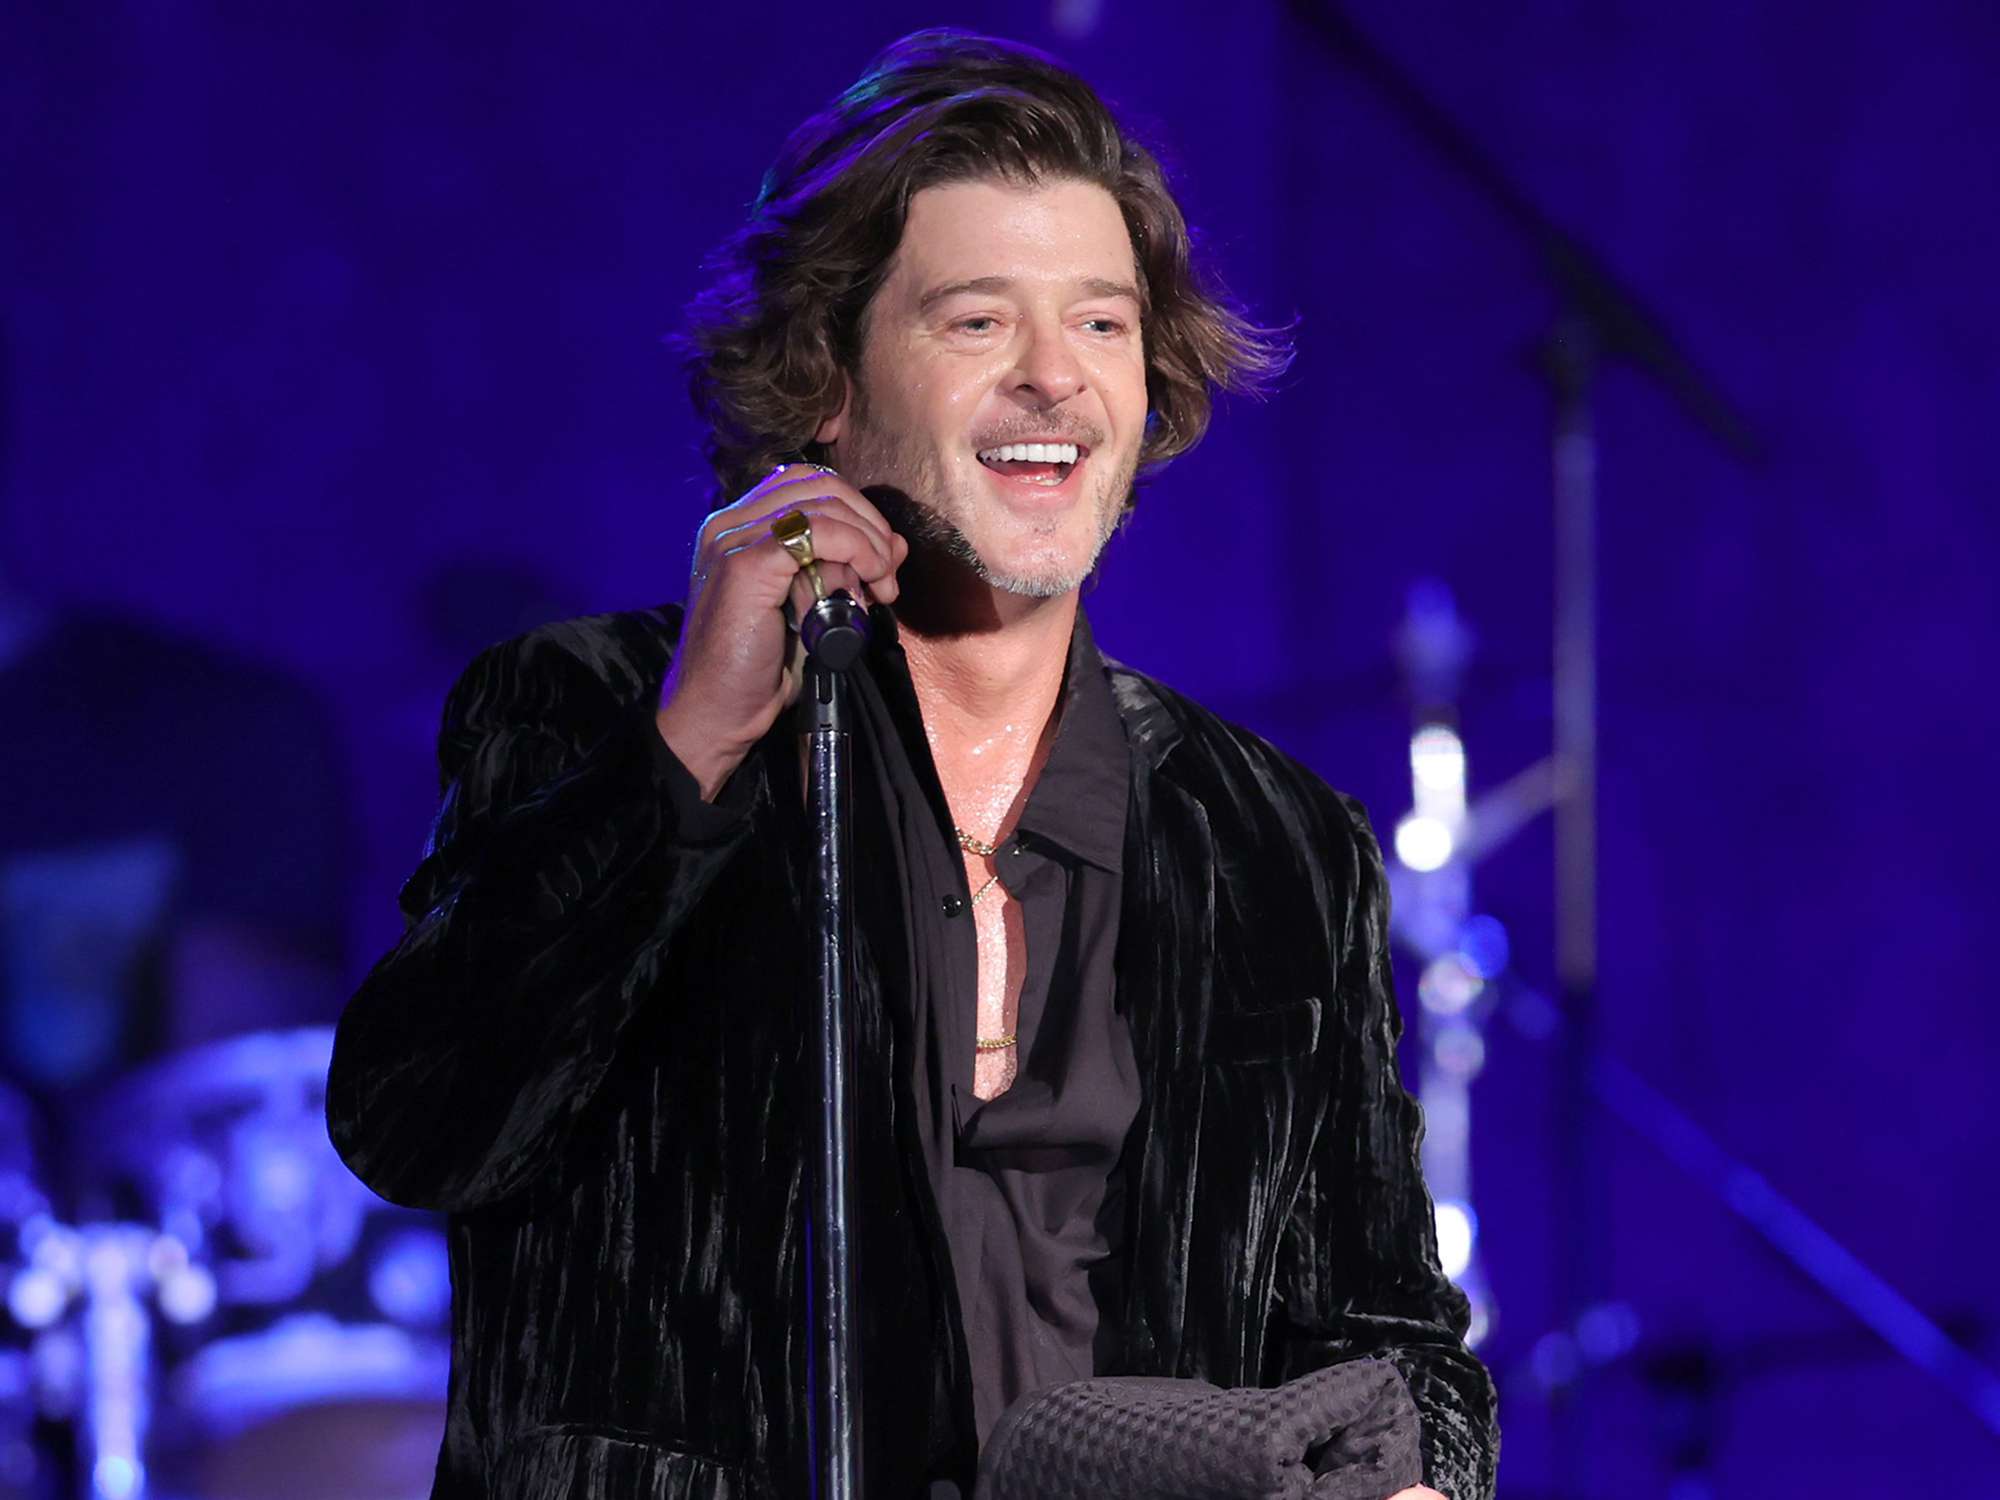 Robin Thicke performs onstage during the 25th anniversary of UCLA Jonsson Cancer Center Foundation's "Taste for a Cure" event on April 29, 2022 in Los Angeles, California.